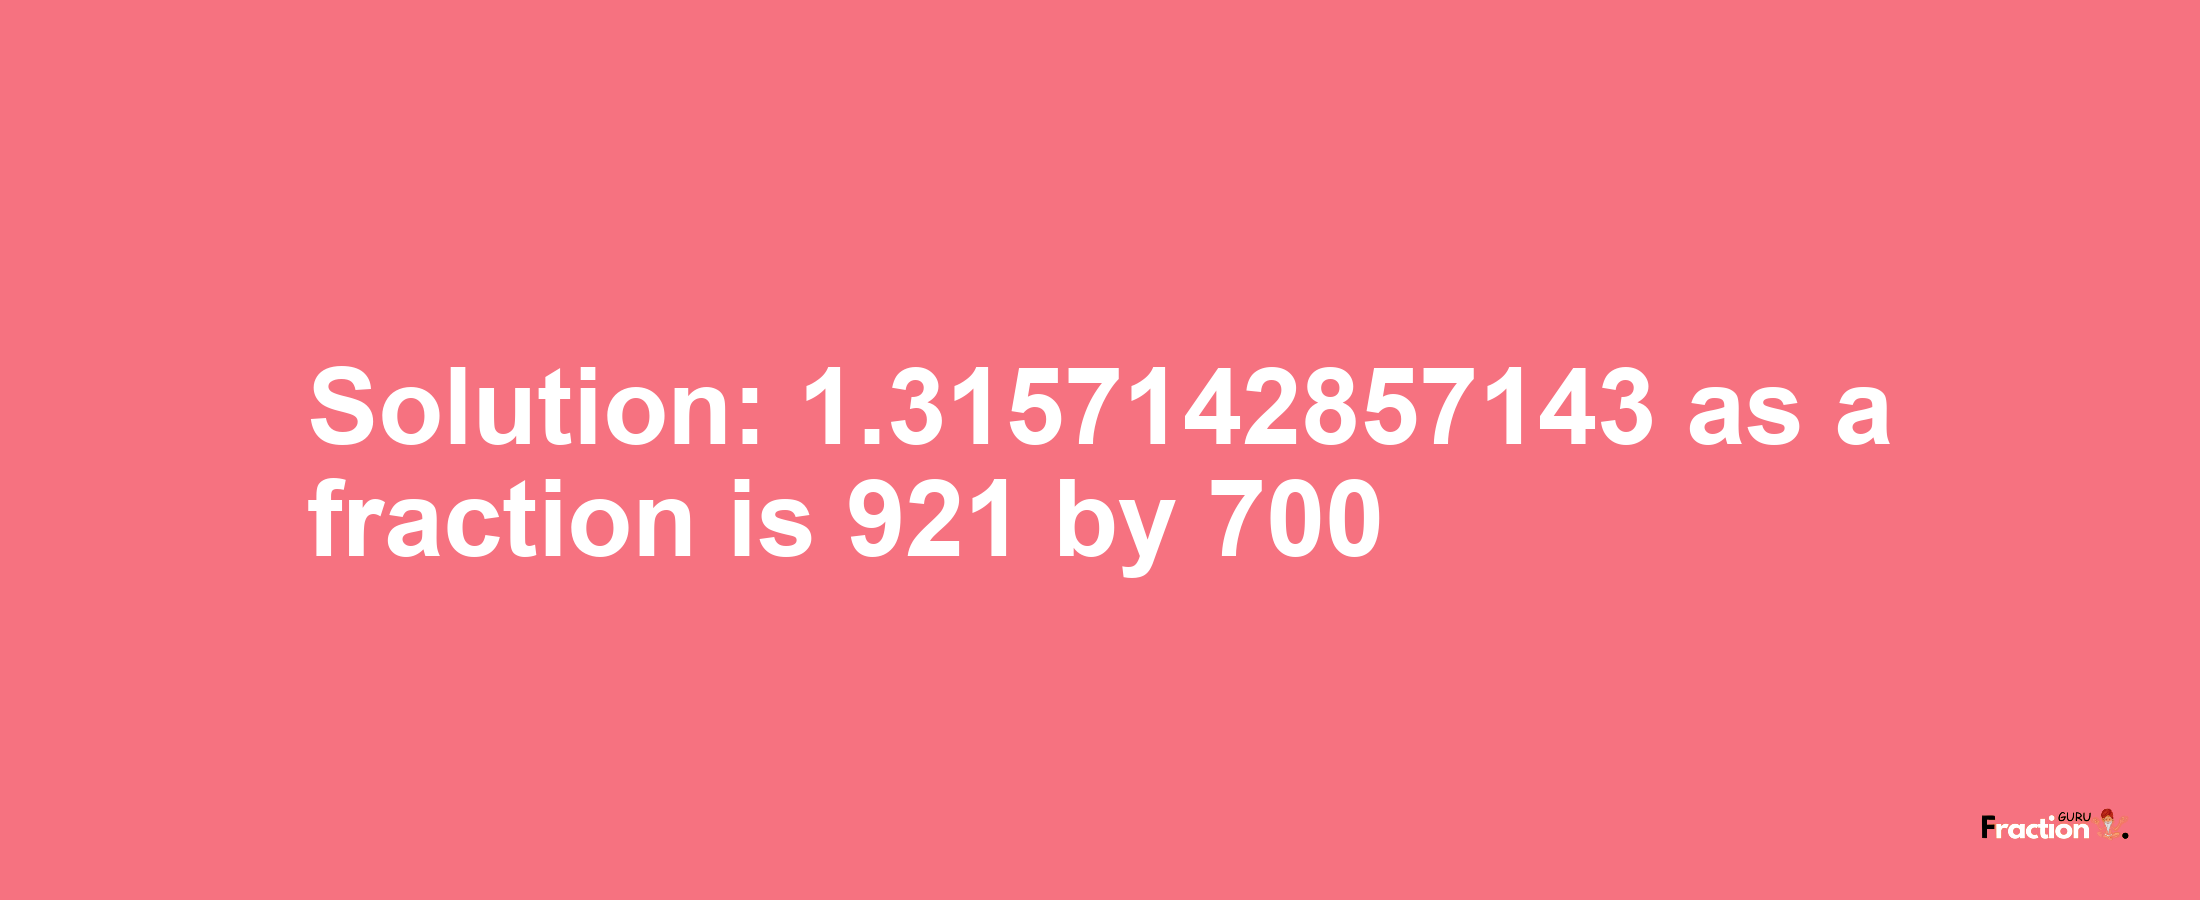 Solution:1.3157142857143 as a fraction is 921/700